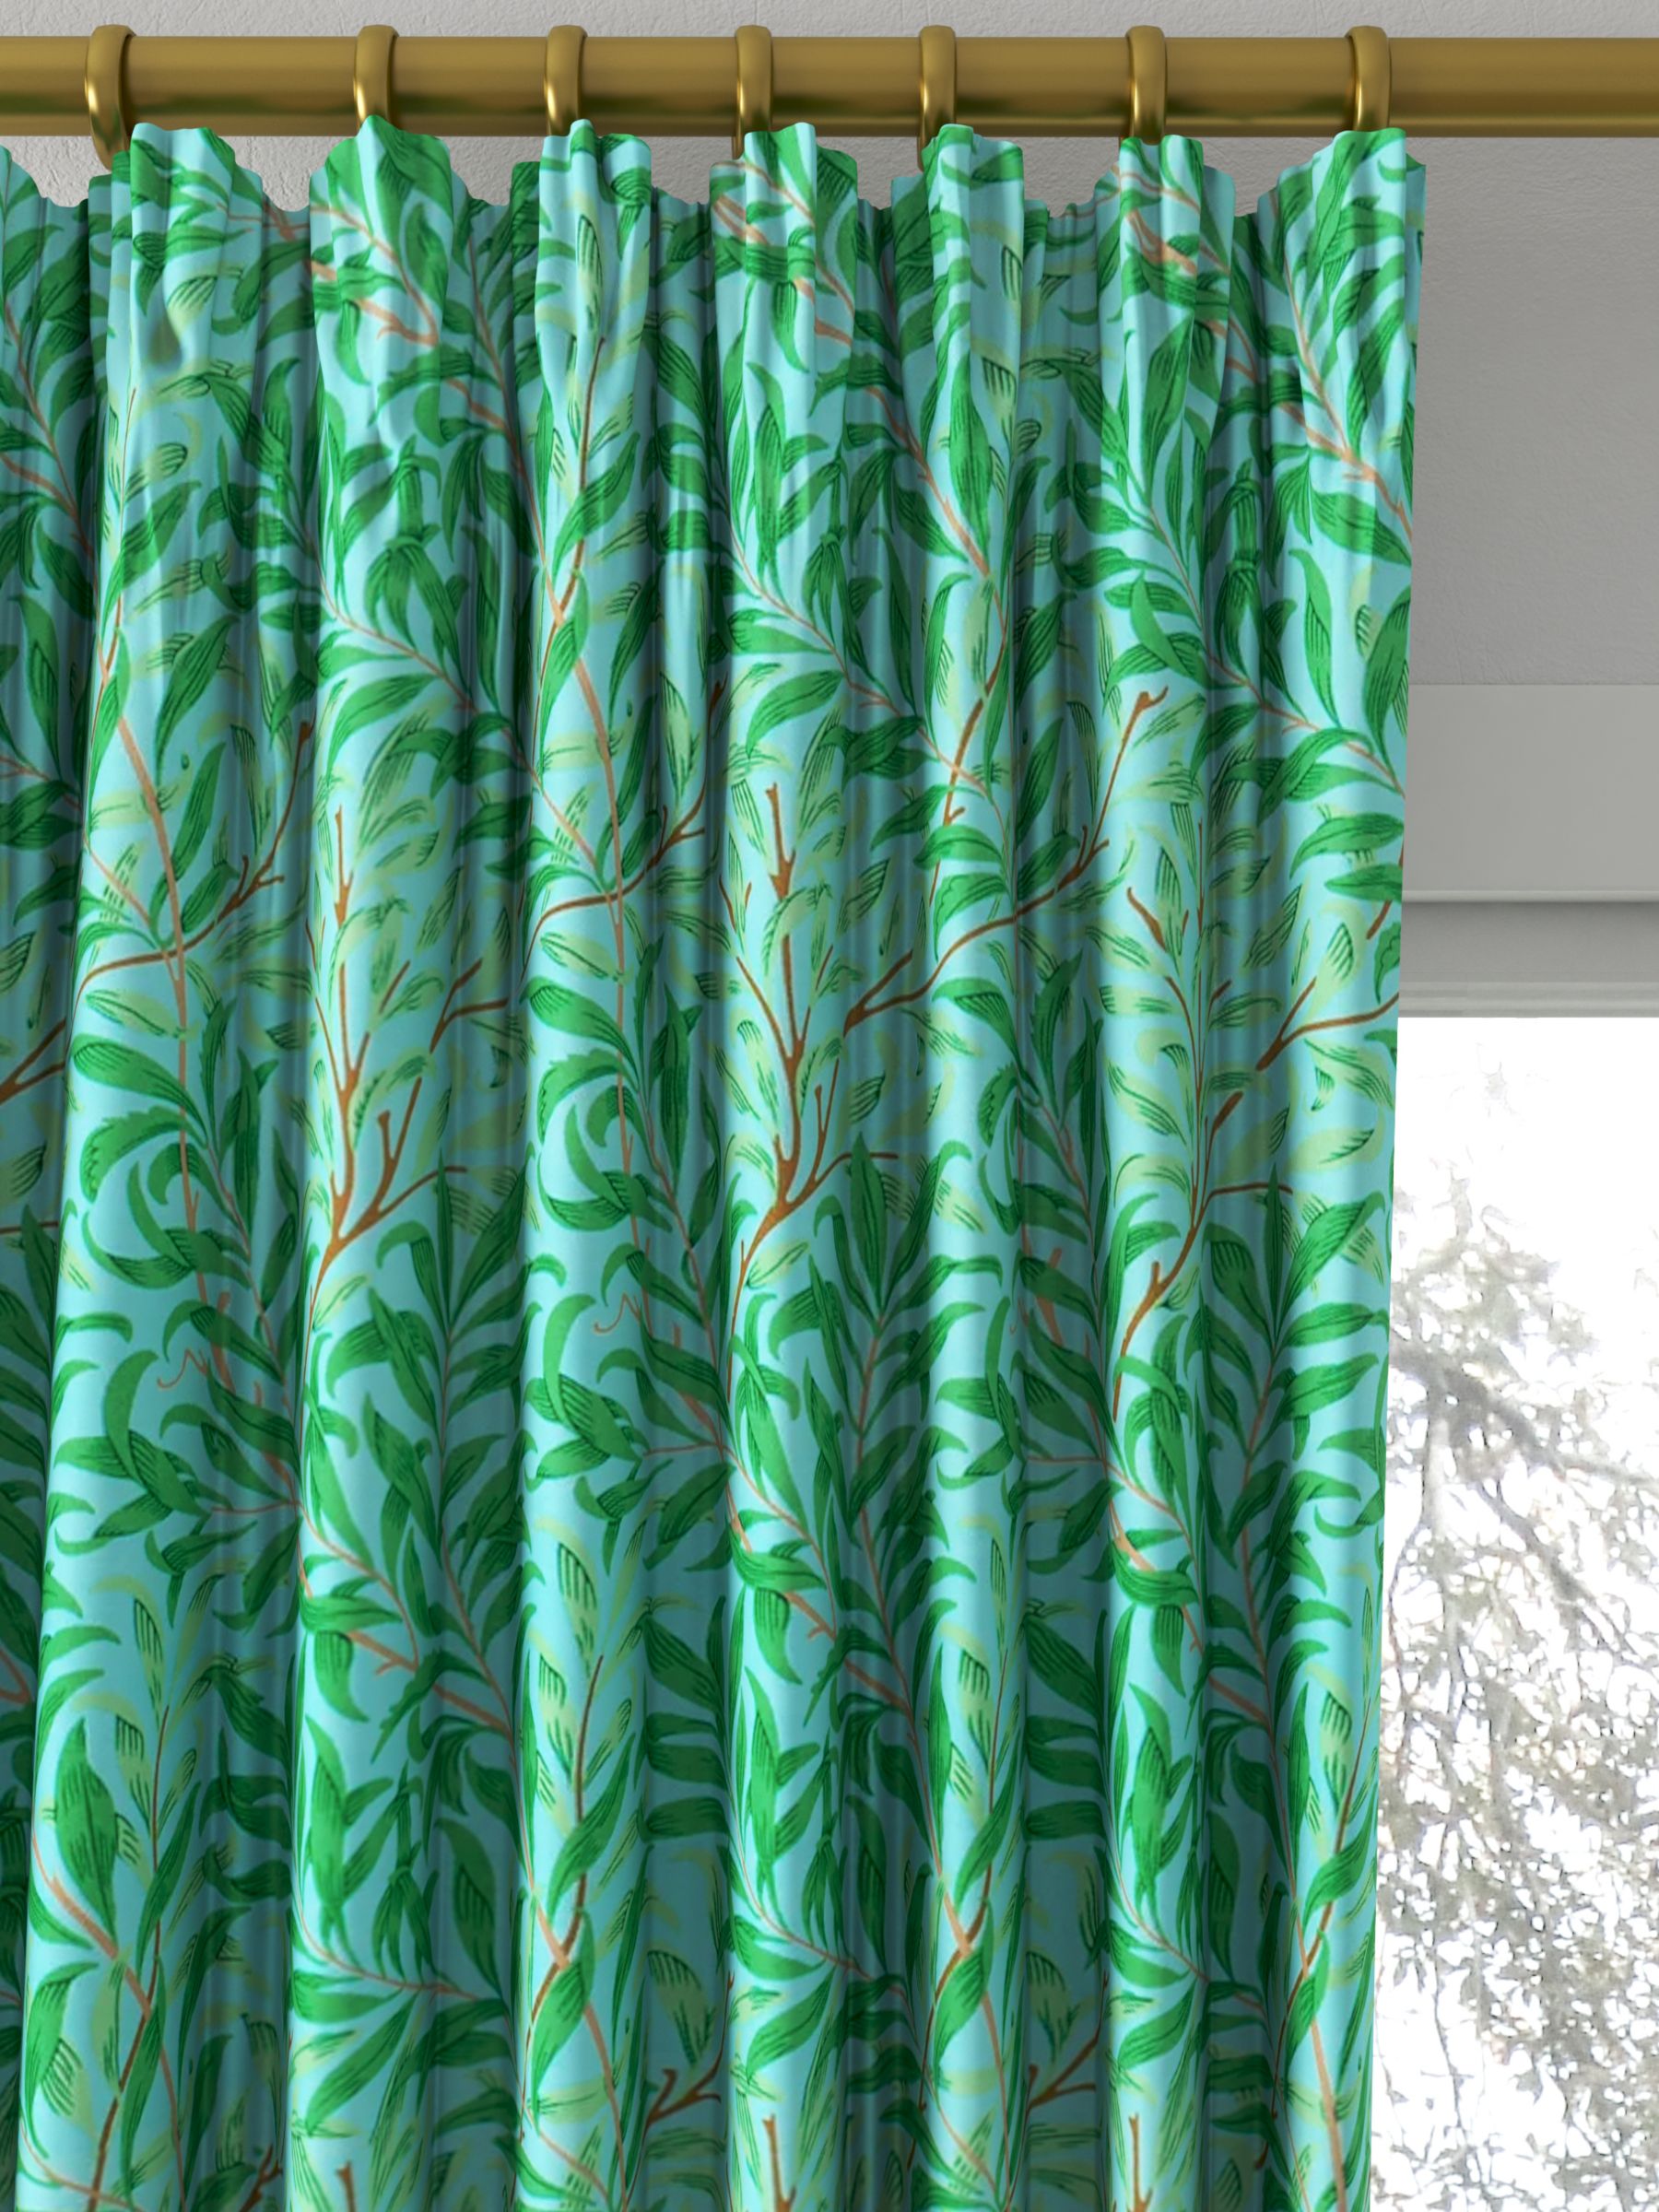 Morris & Co. Willow Boughs Made to Measure Curtains, Sky/Leaf Green